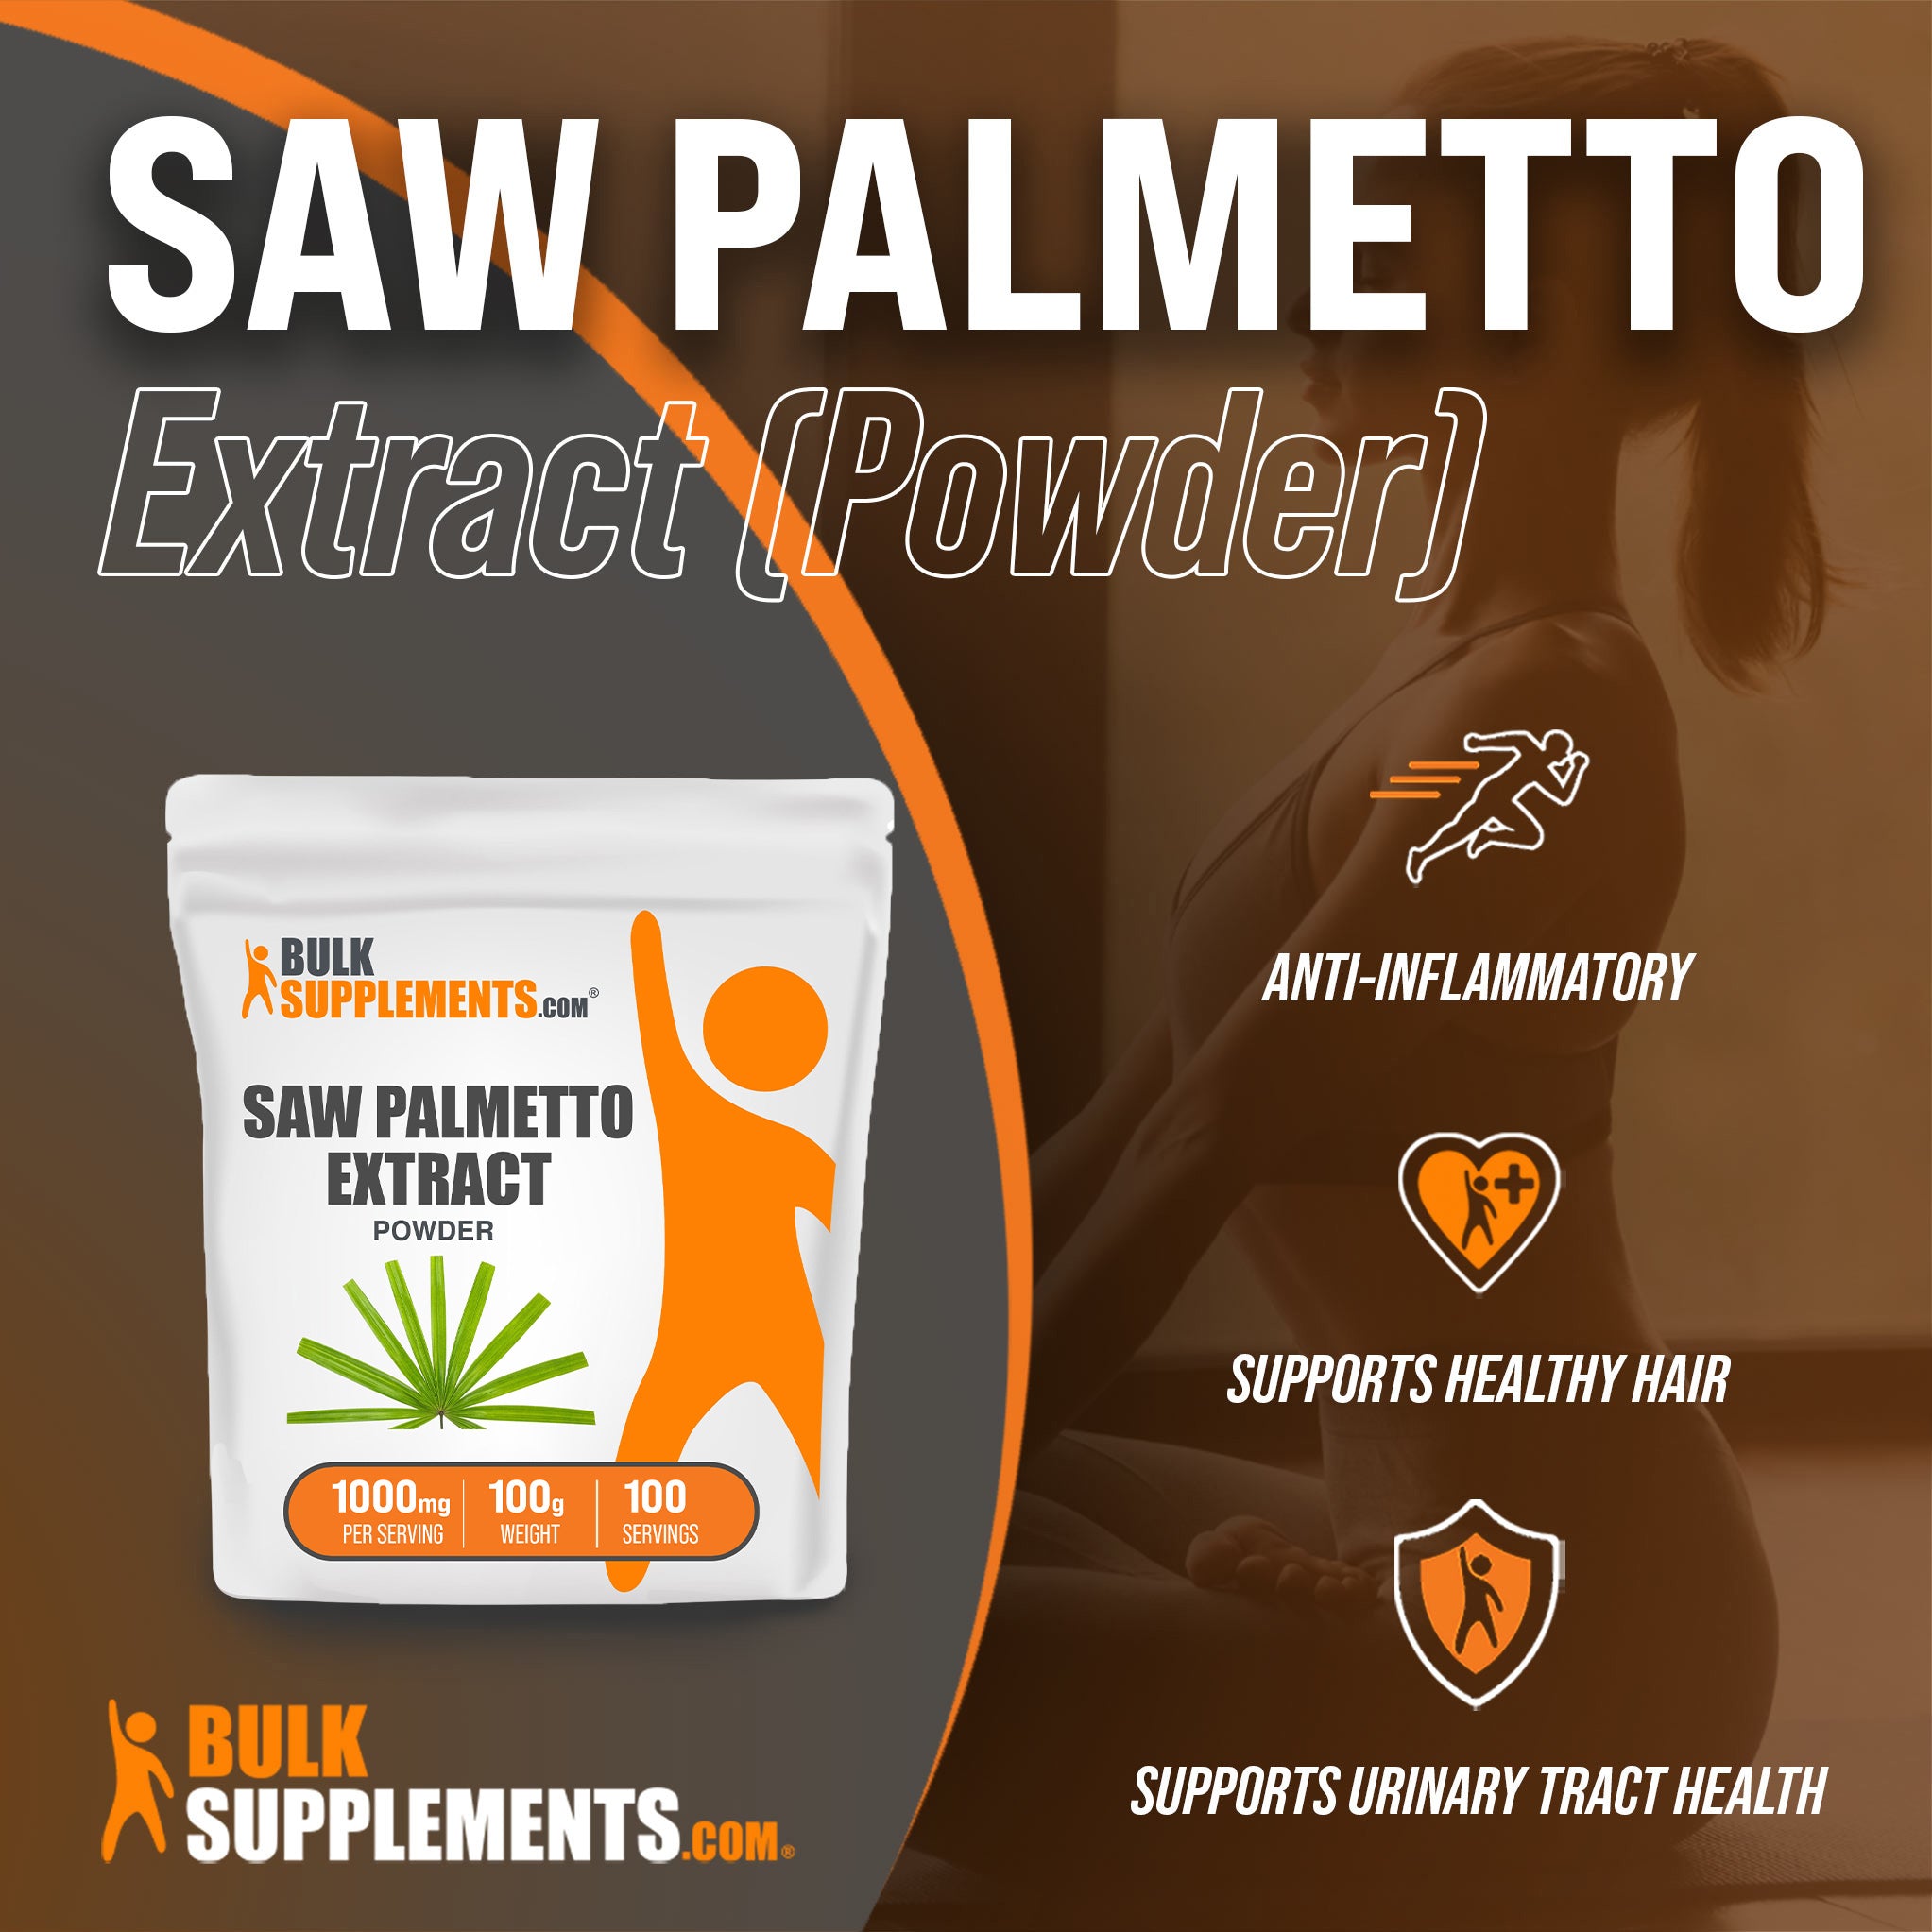 Benefits of Saw Palmetto Extract: anti-inflammatory, supports healthy hair, supports urinary tract health